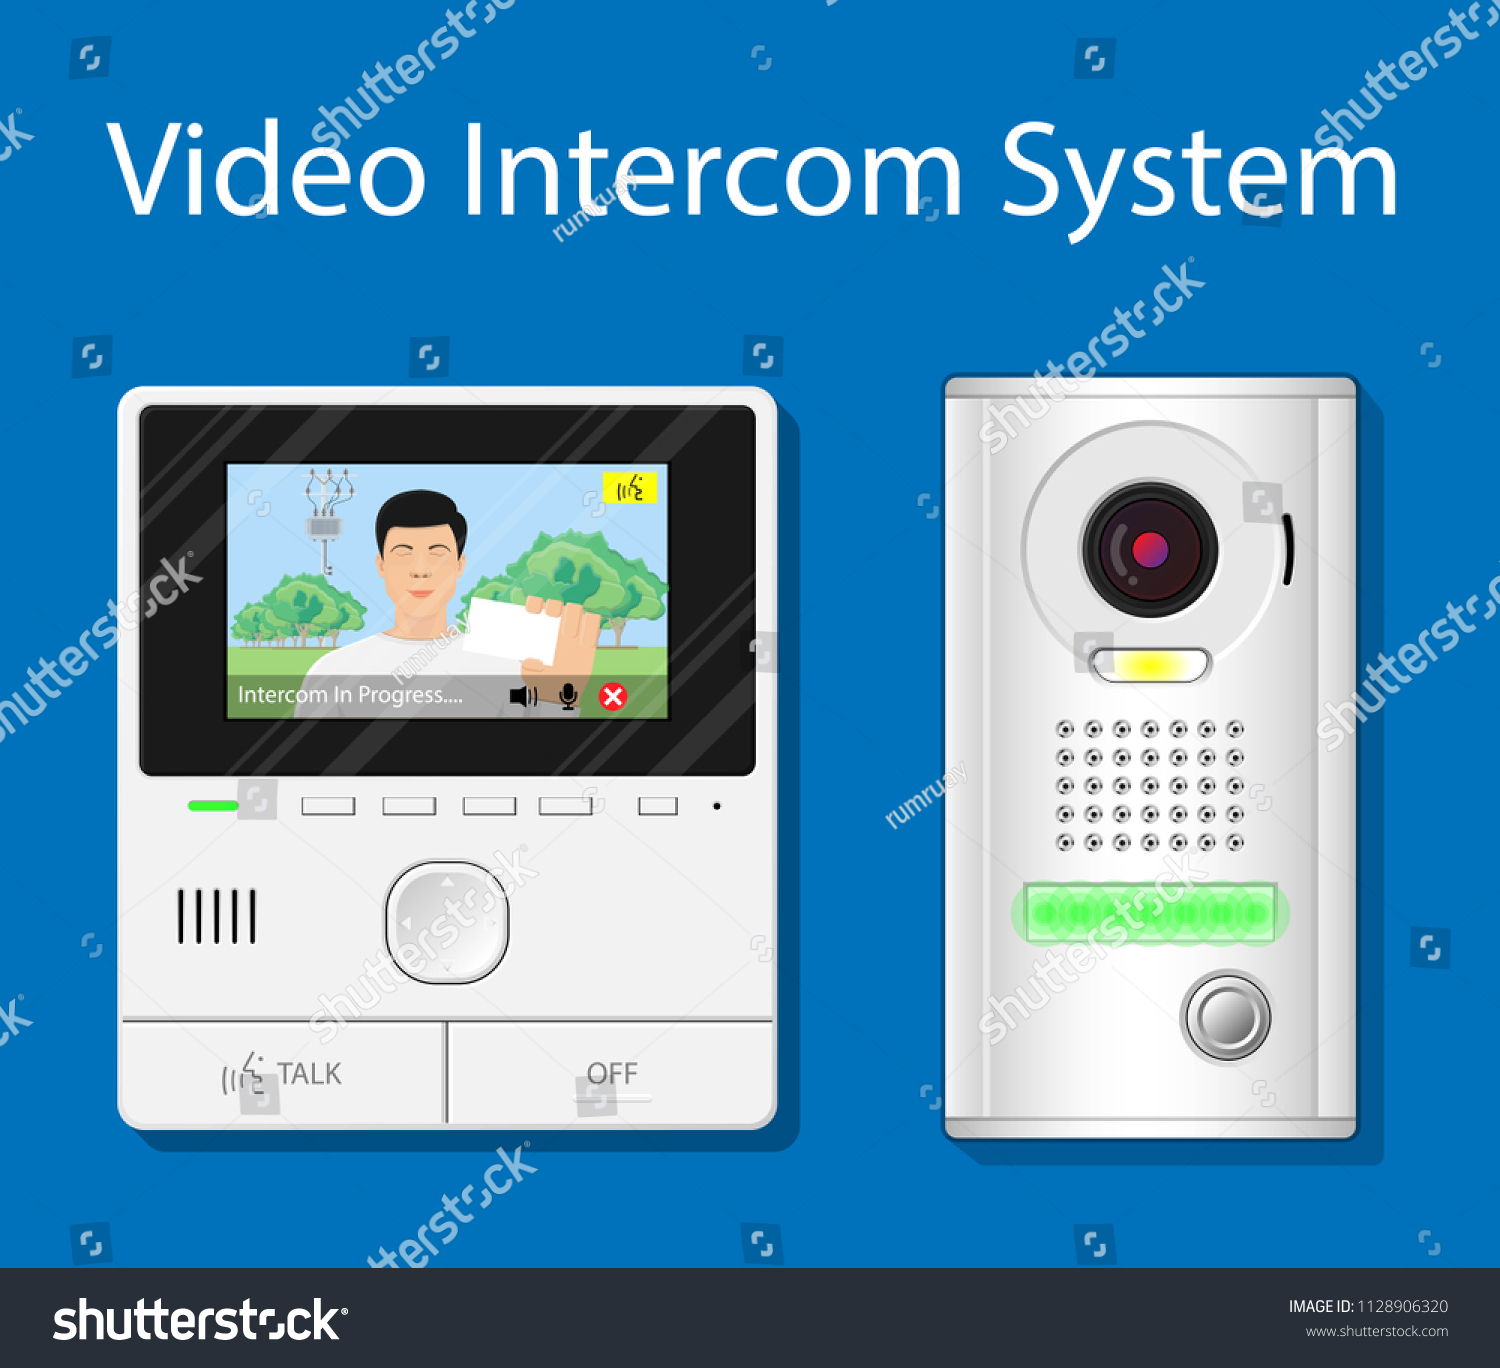 How to Go About Choosing the Right Intercom System?